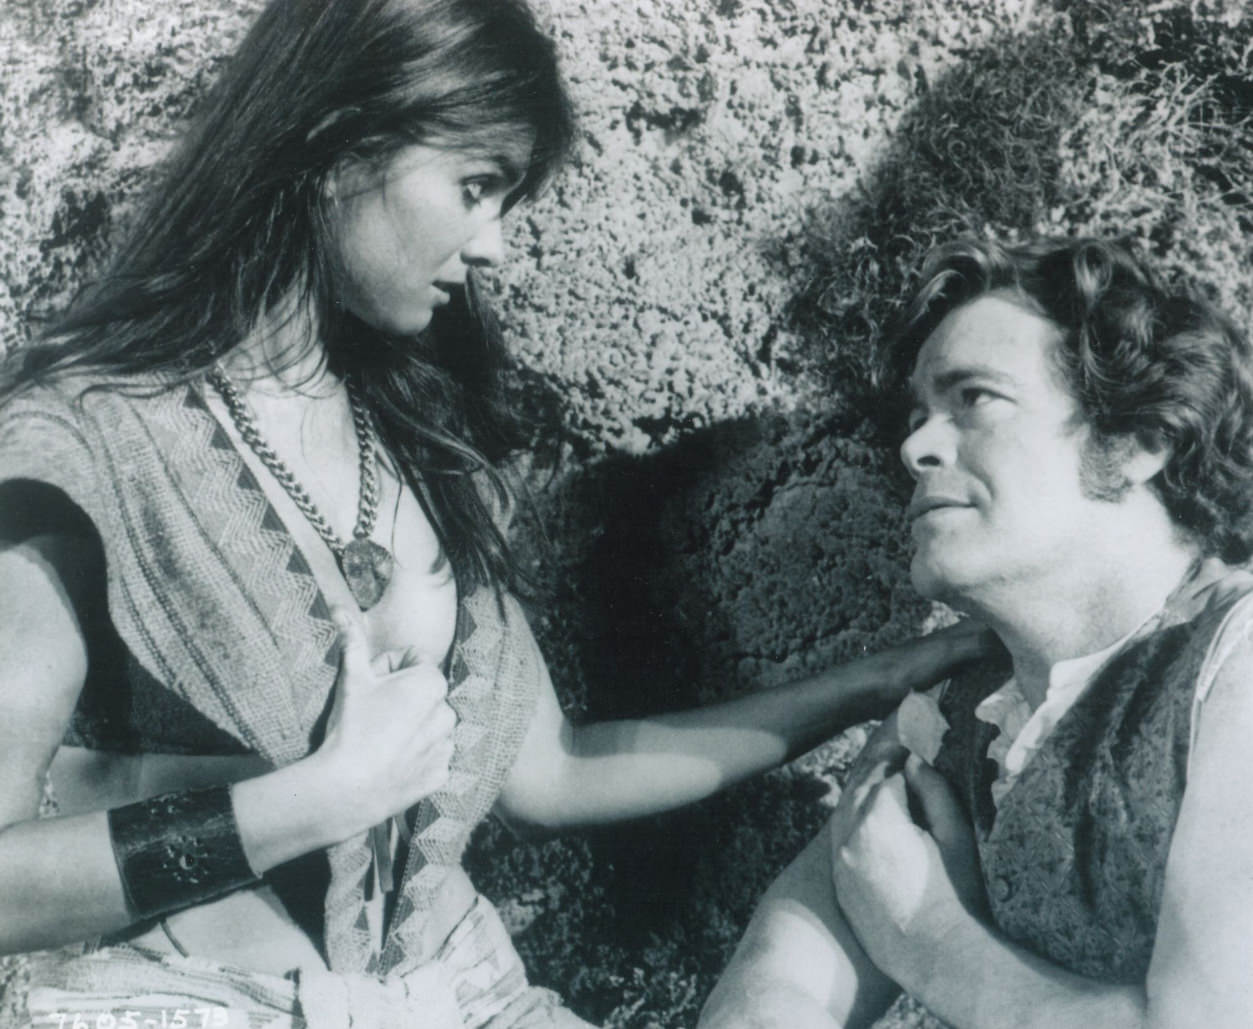 Caroline Munor with Doug McClure in movie 'At the Earth's Core', 1976